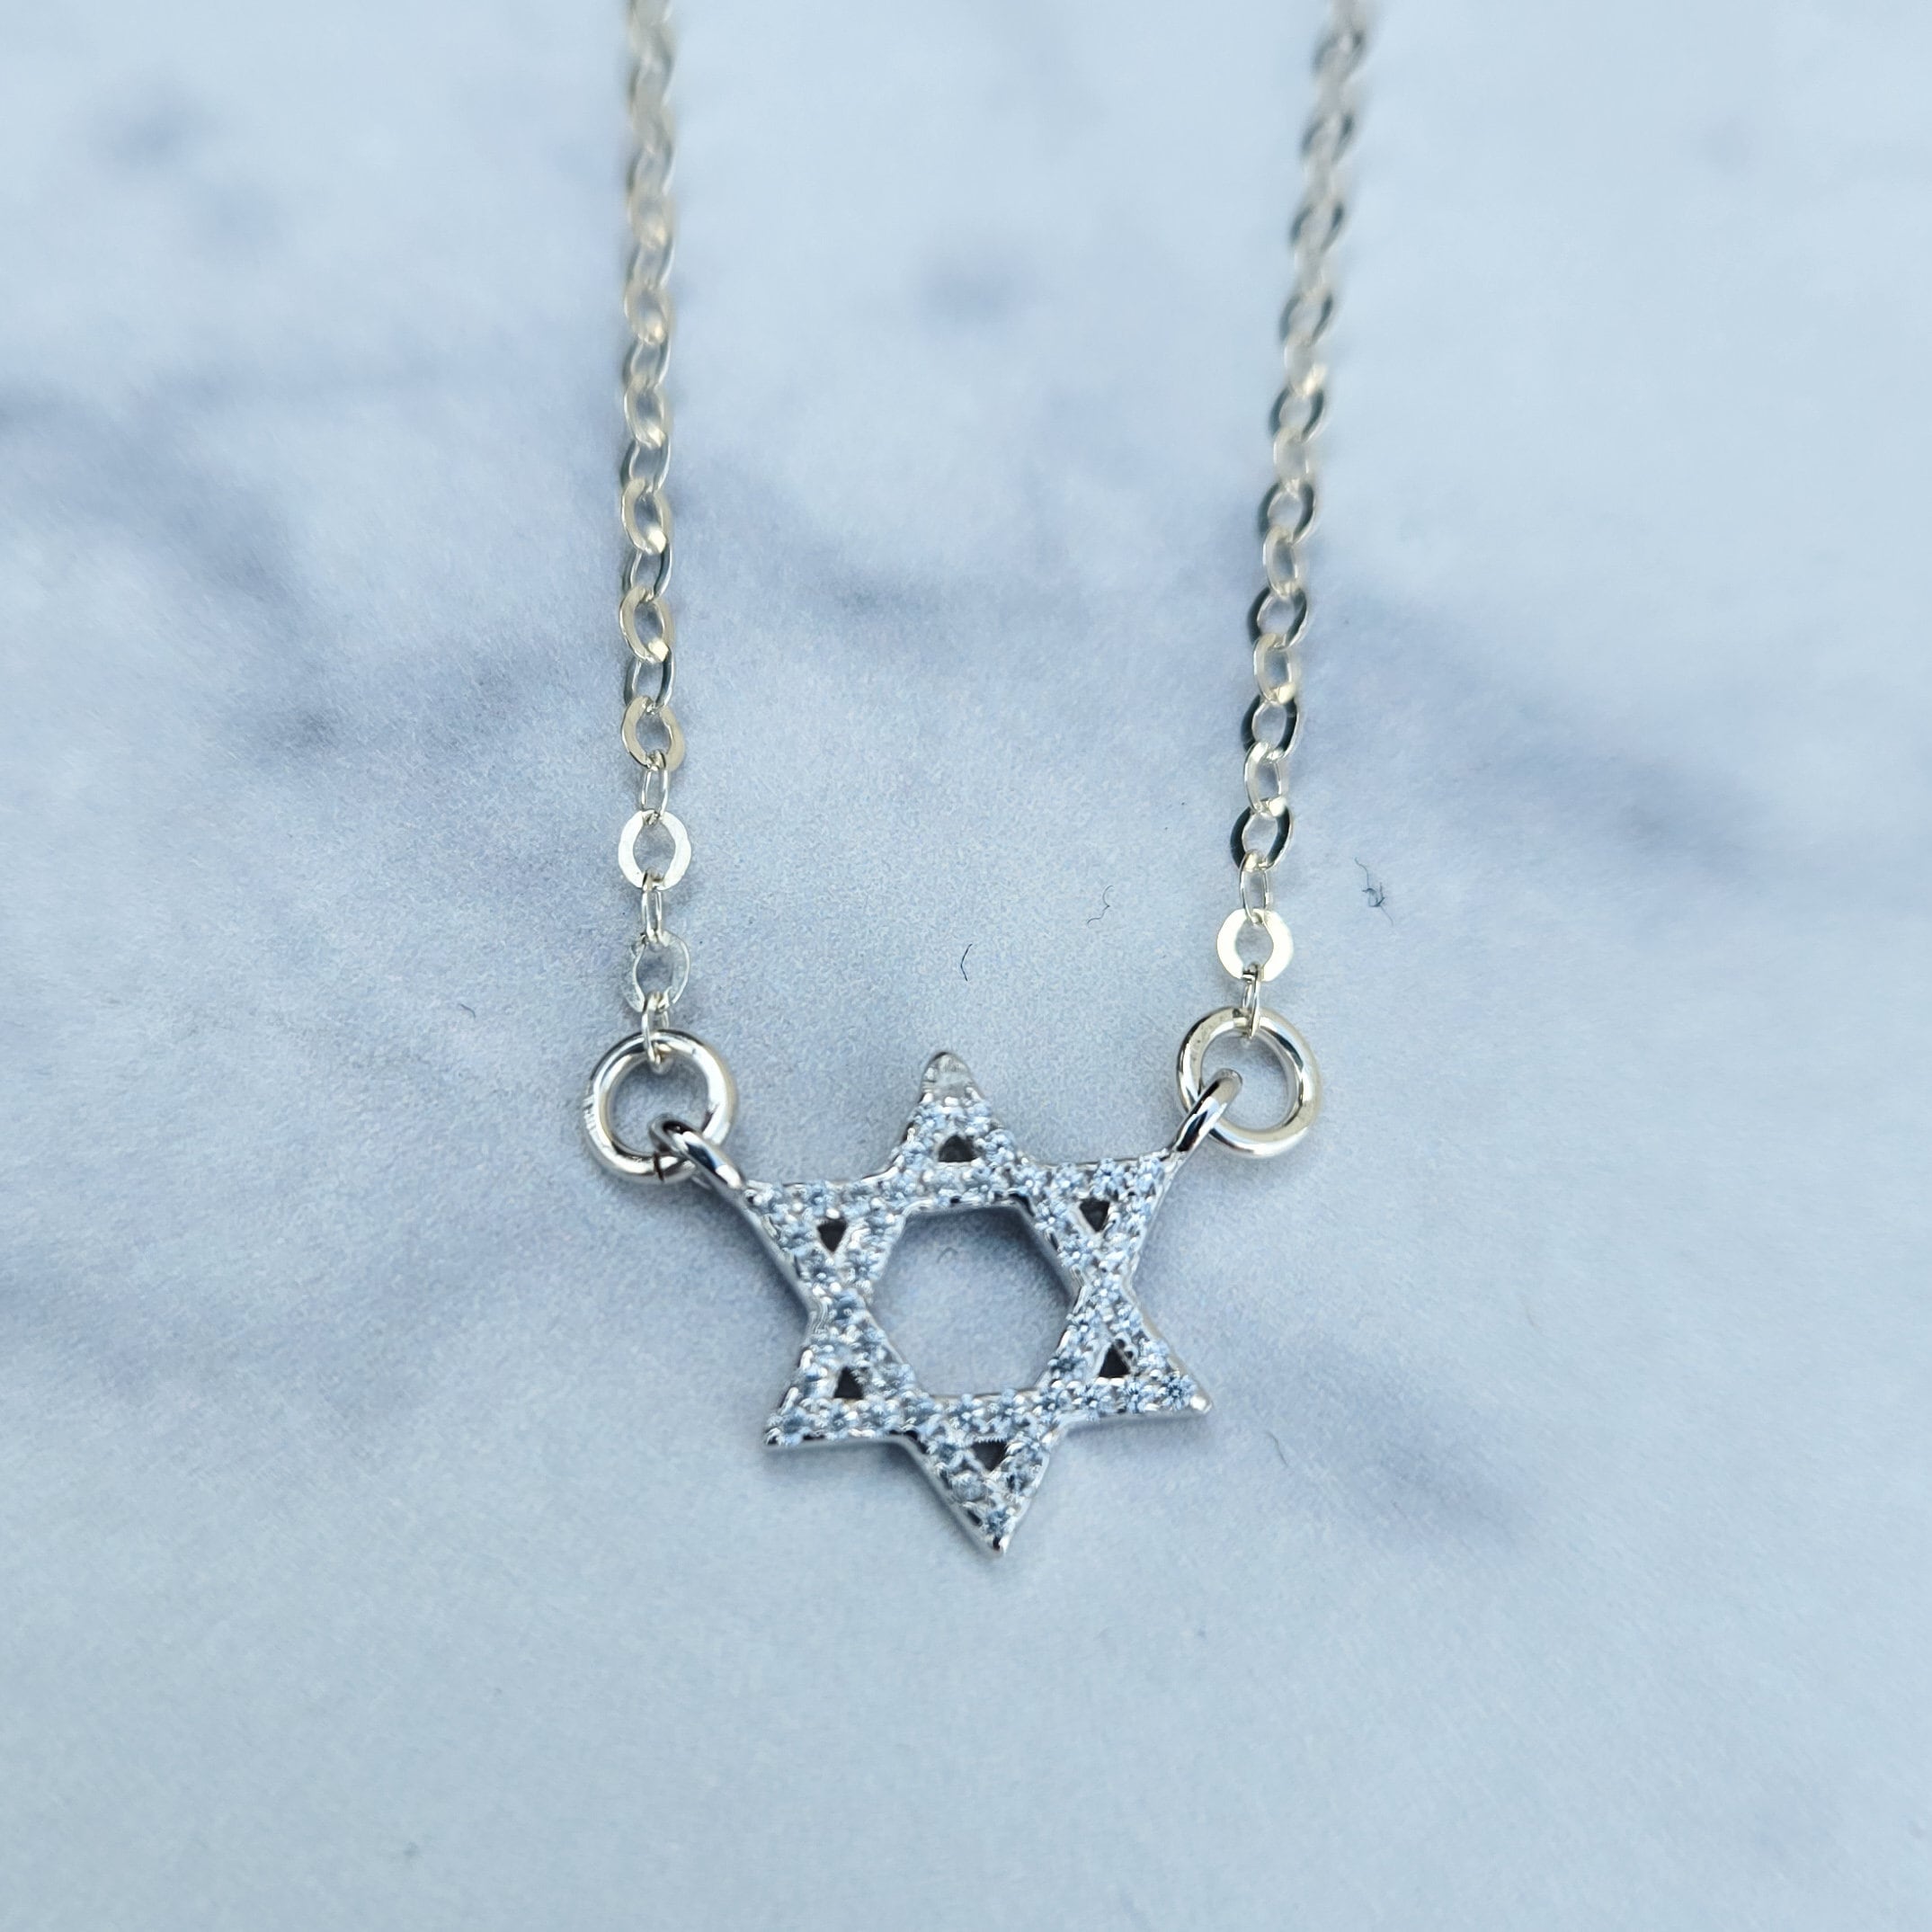 Stand with Israel Donation Jewelry Salt and Sparkle